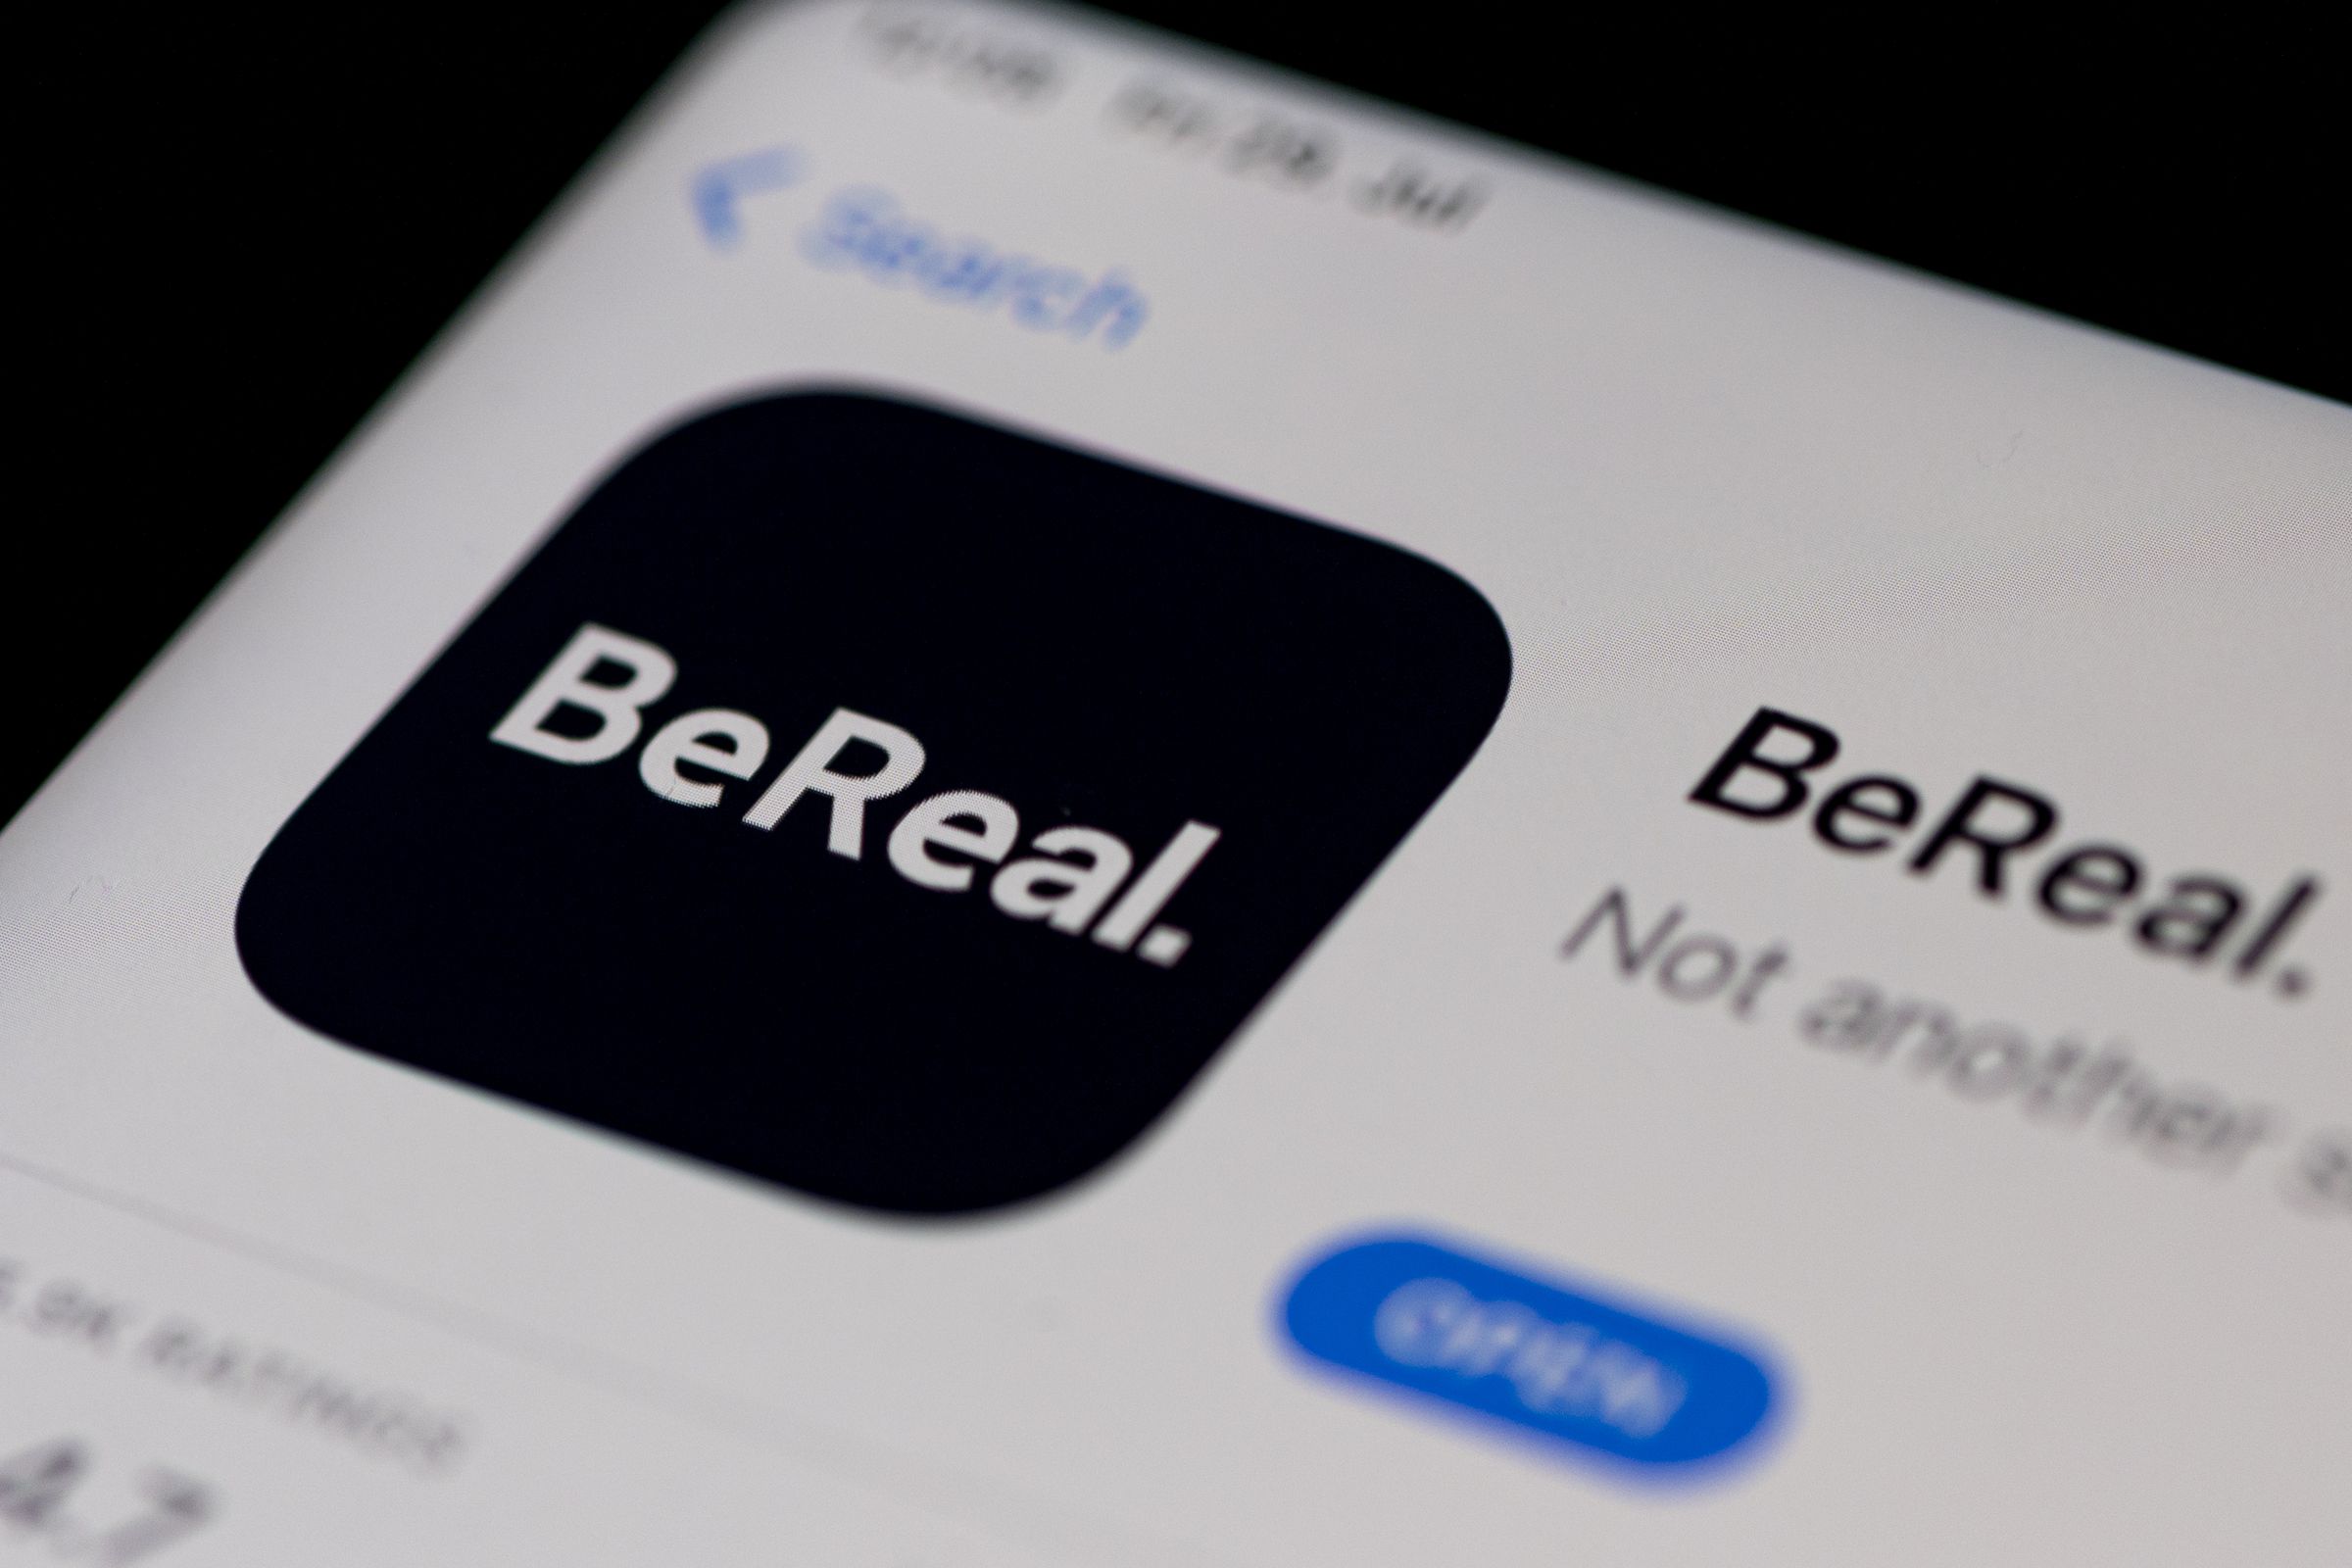 An image showing the Bereal app in the App Store